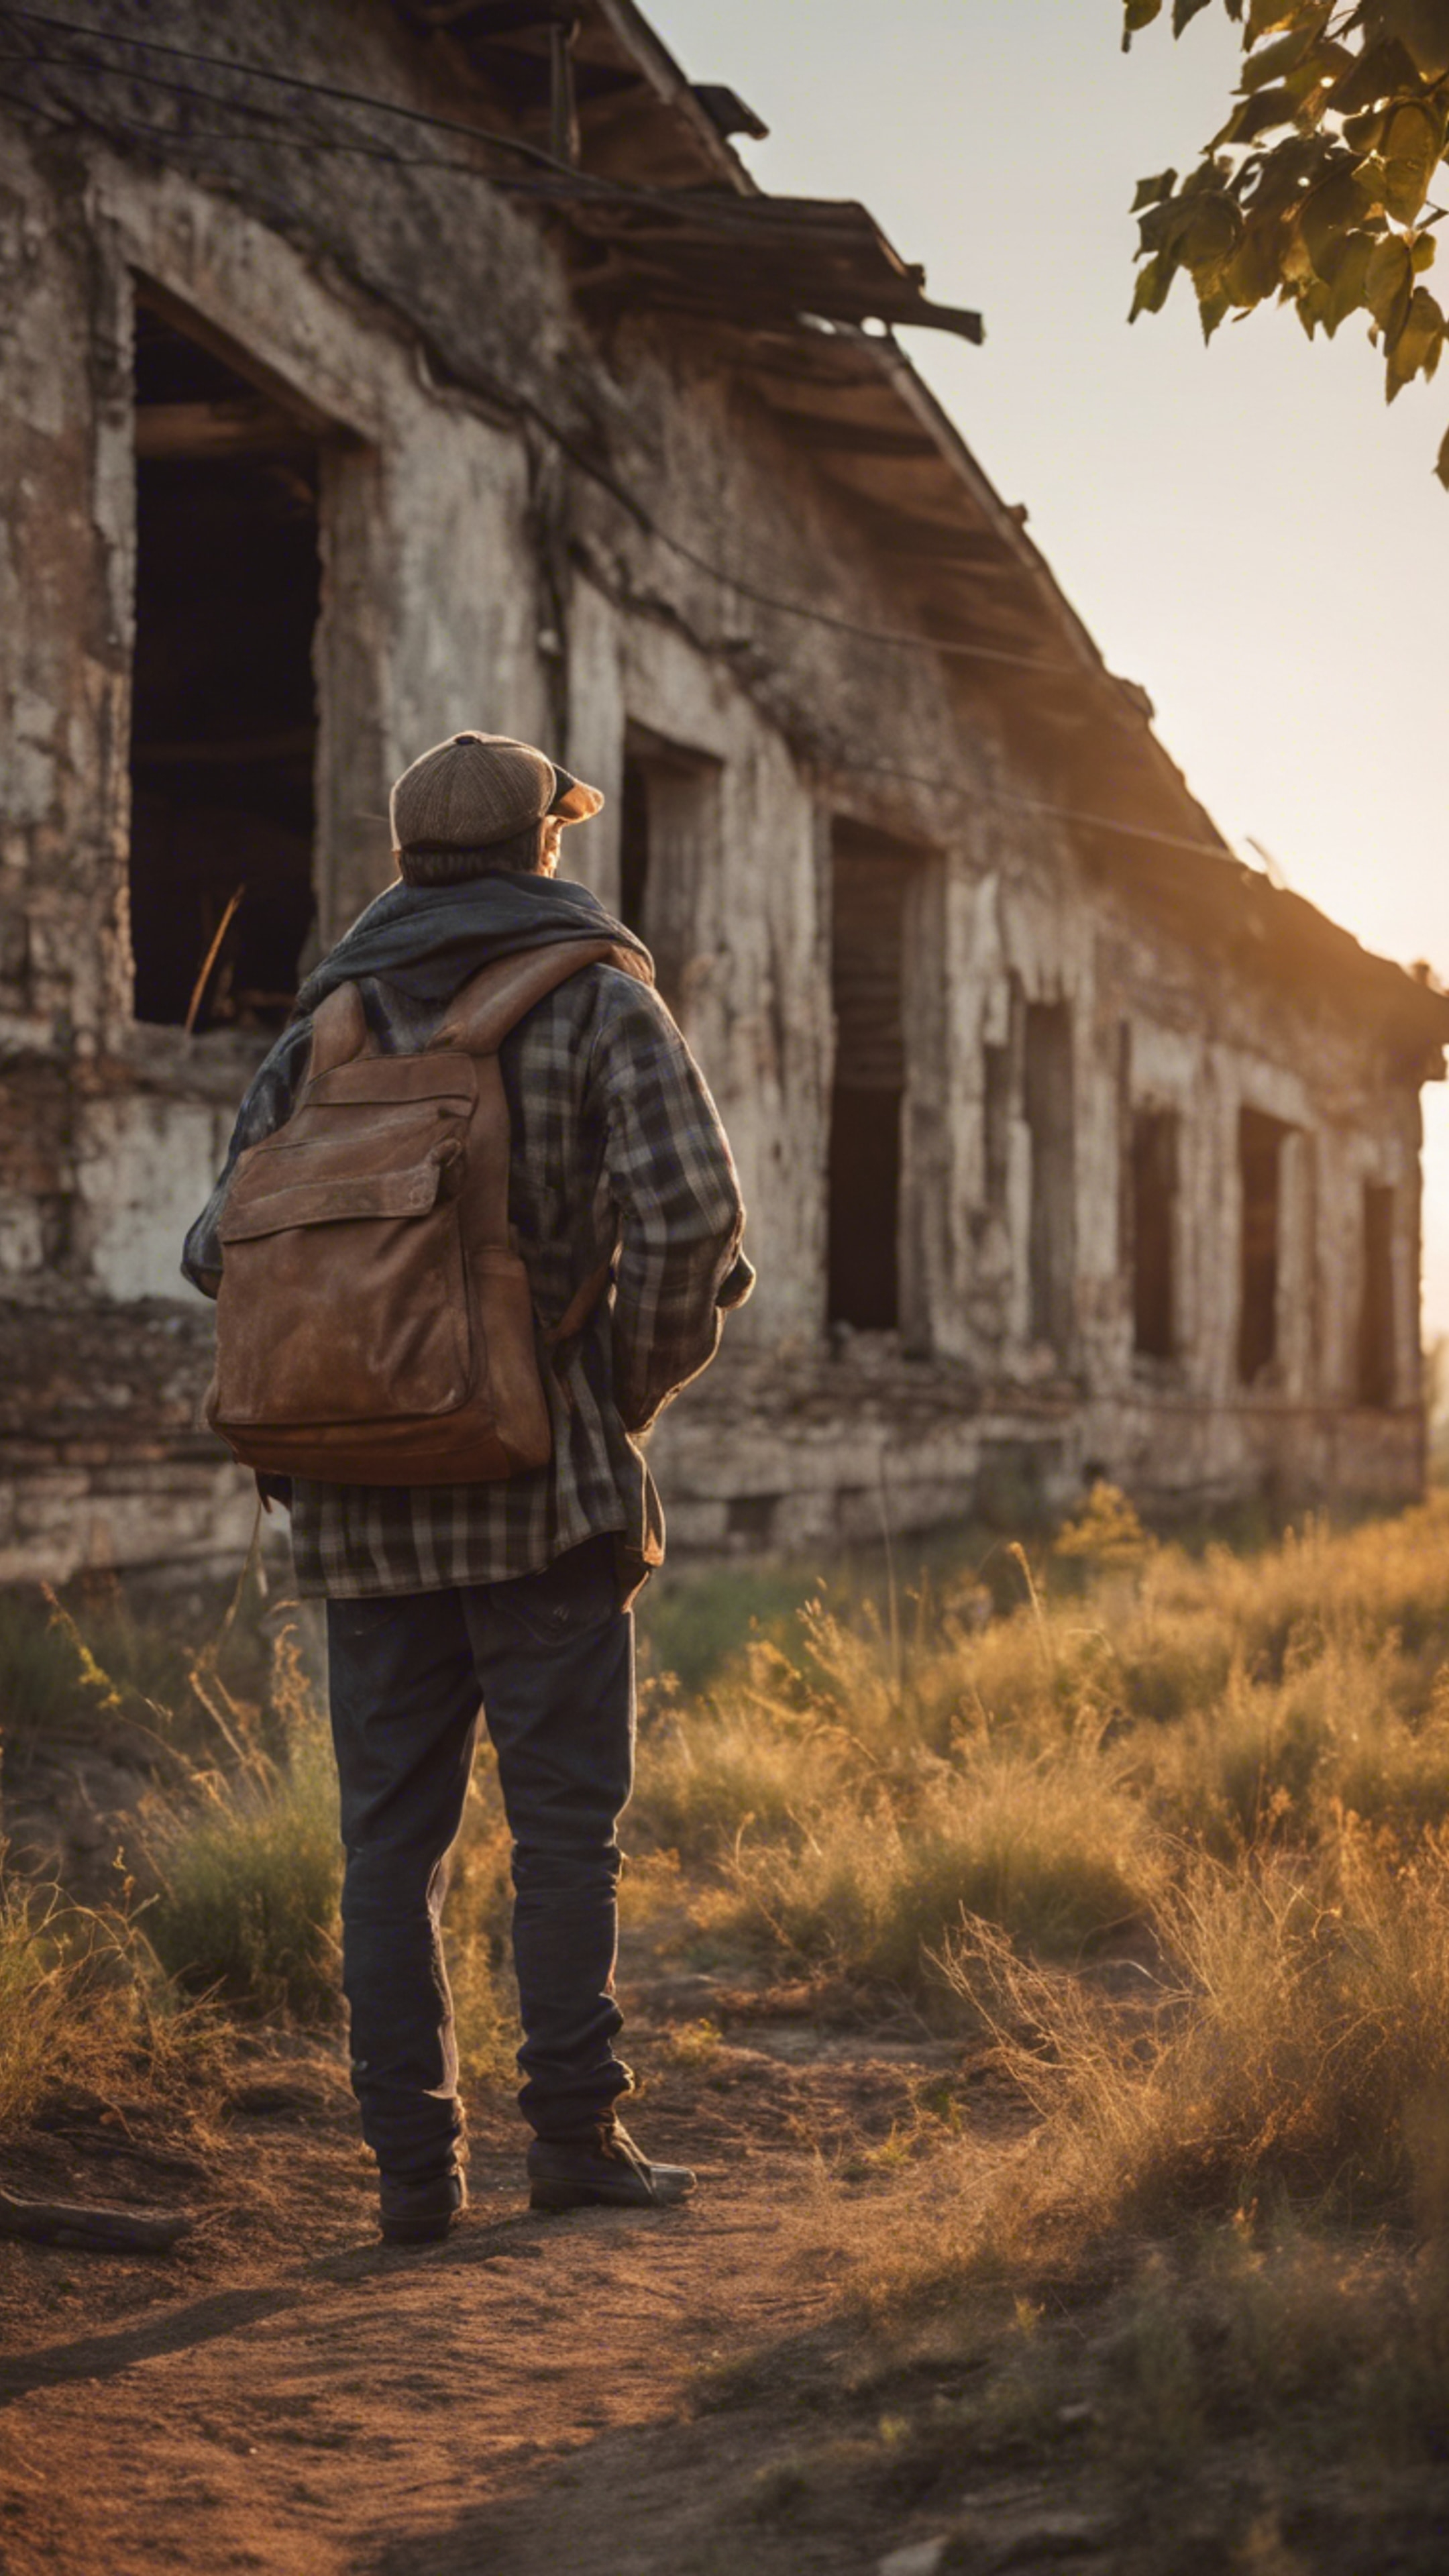 A rustic man exploring and photographing an old abandon building bathed in the soft glow of the sunset. Wallpaper[ddac72f746ef49249f0f]